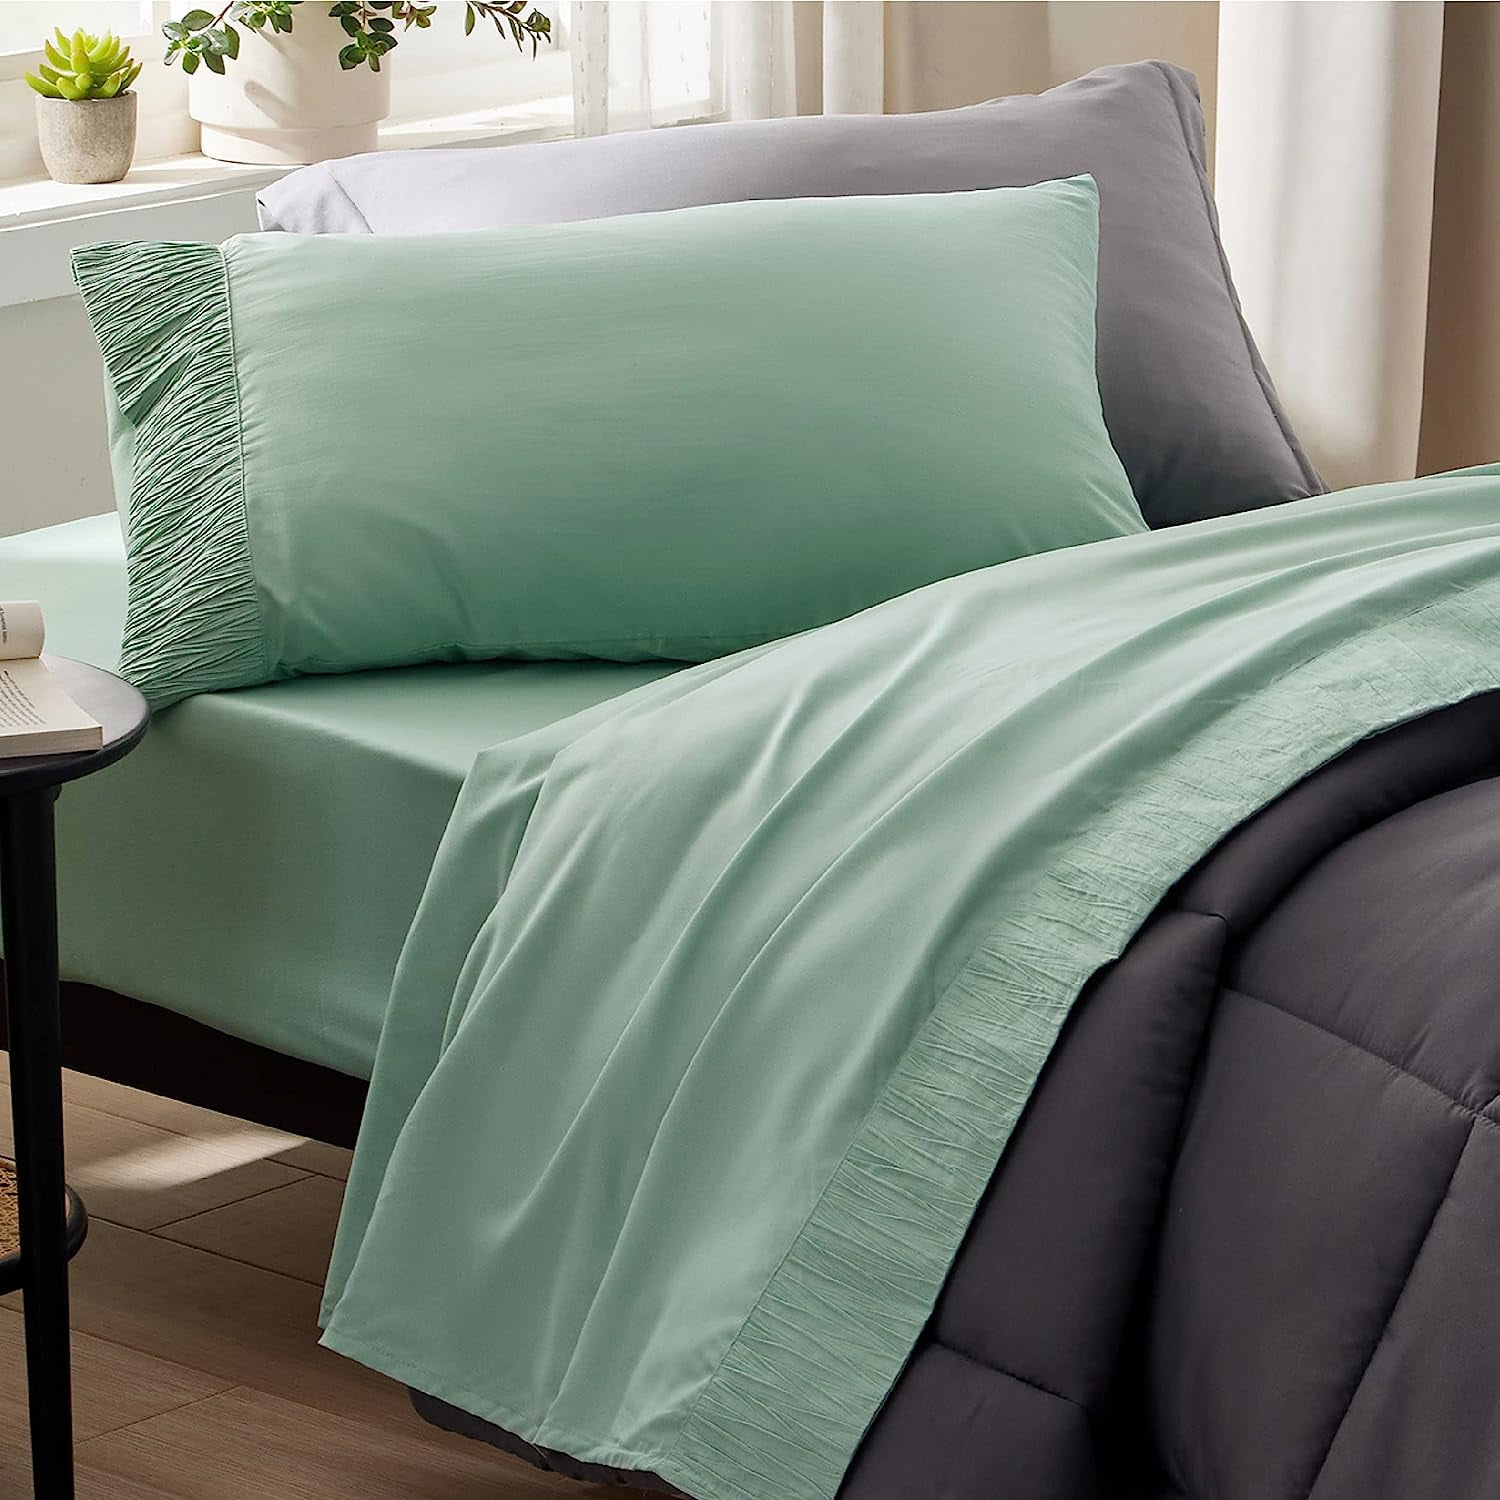 Bedsure 4 Pieces Hotel Luxury Mint Green Sheets Full，Easy Care